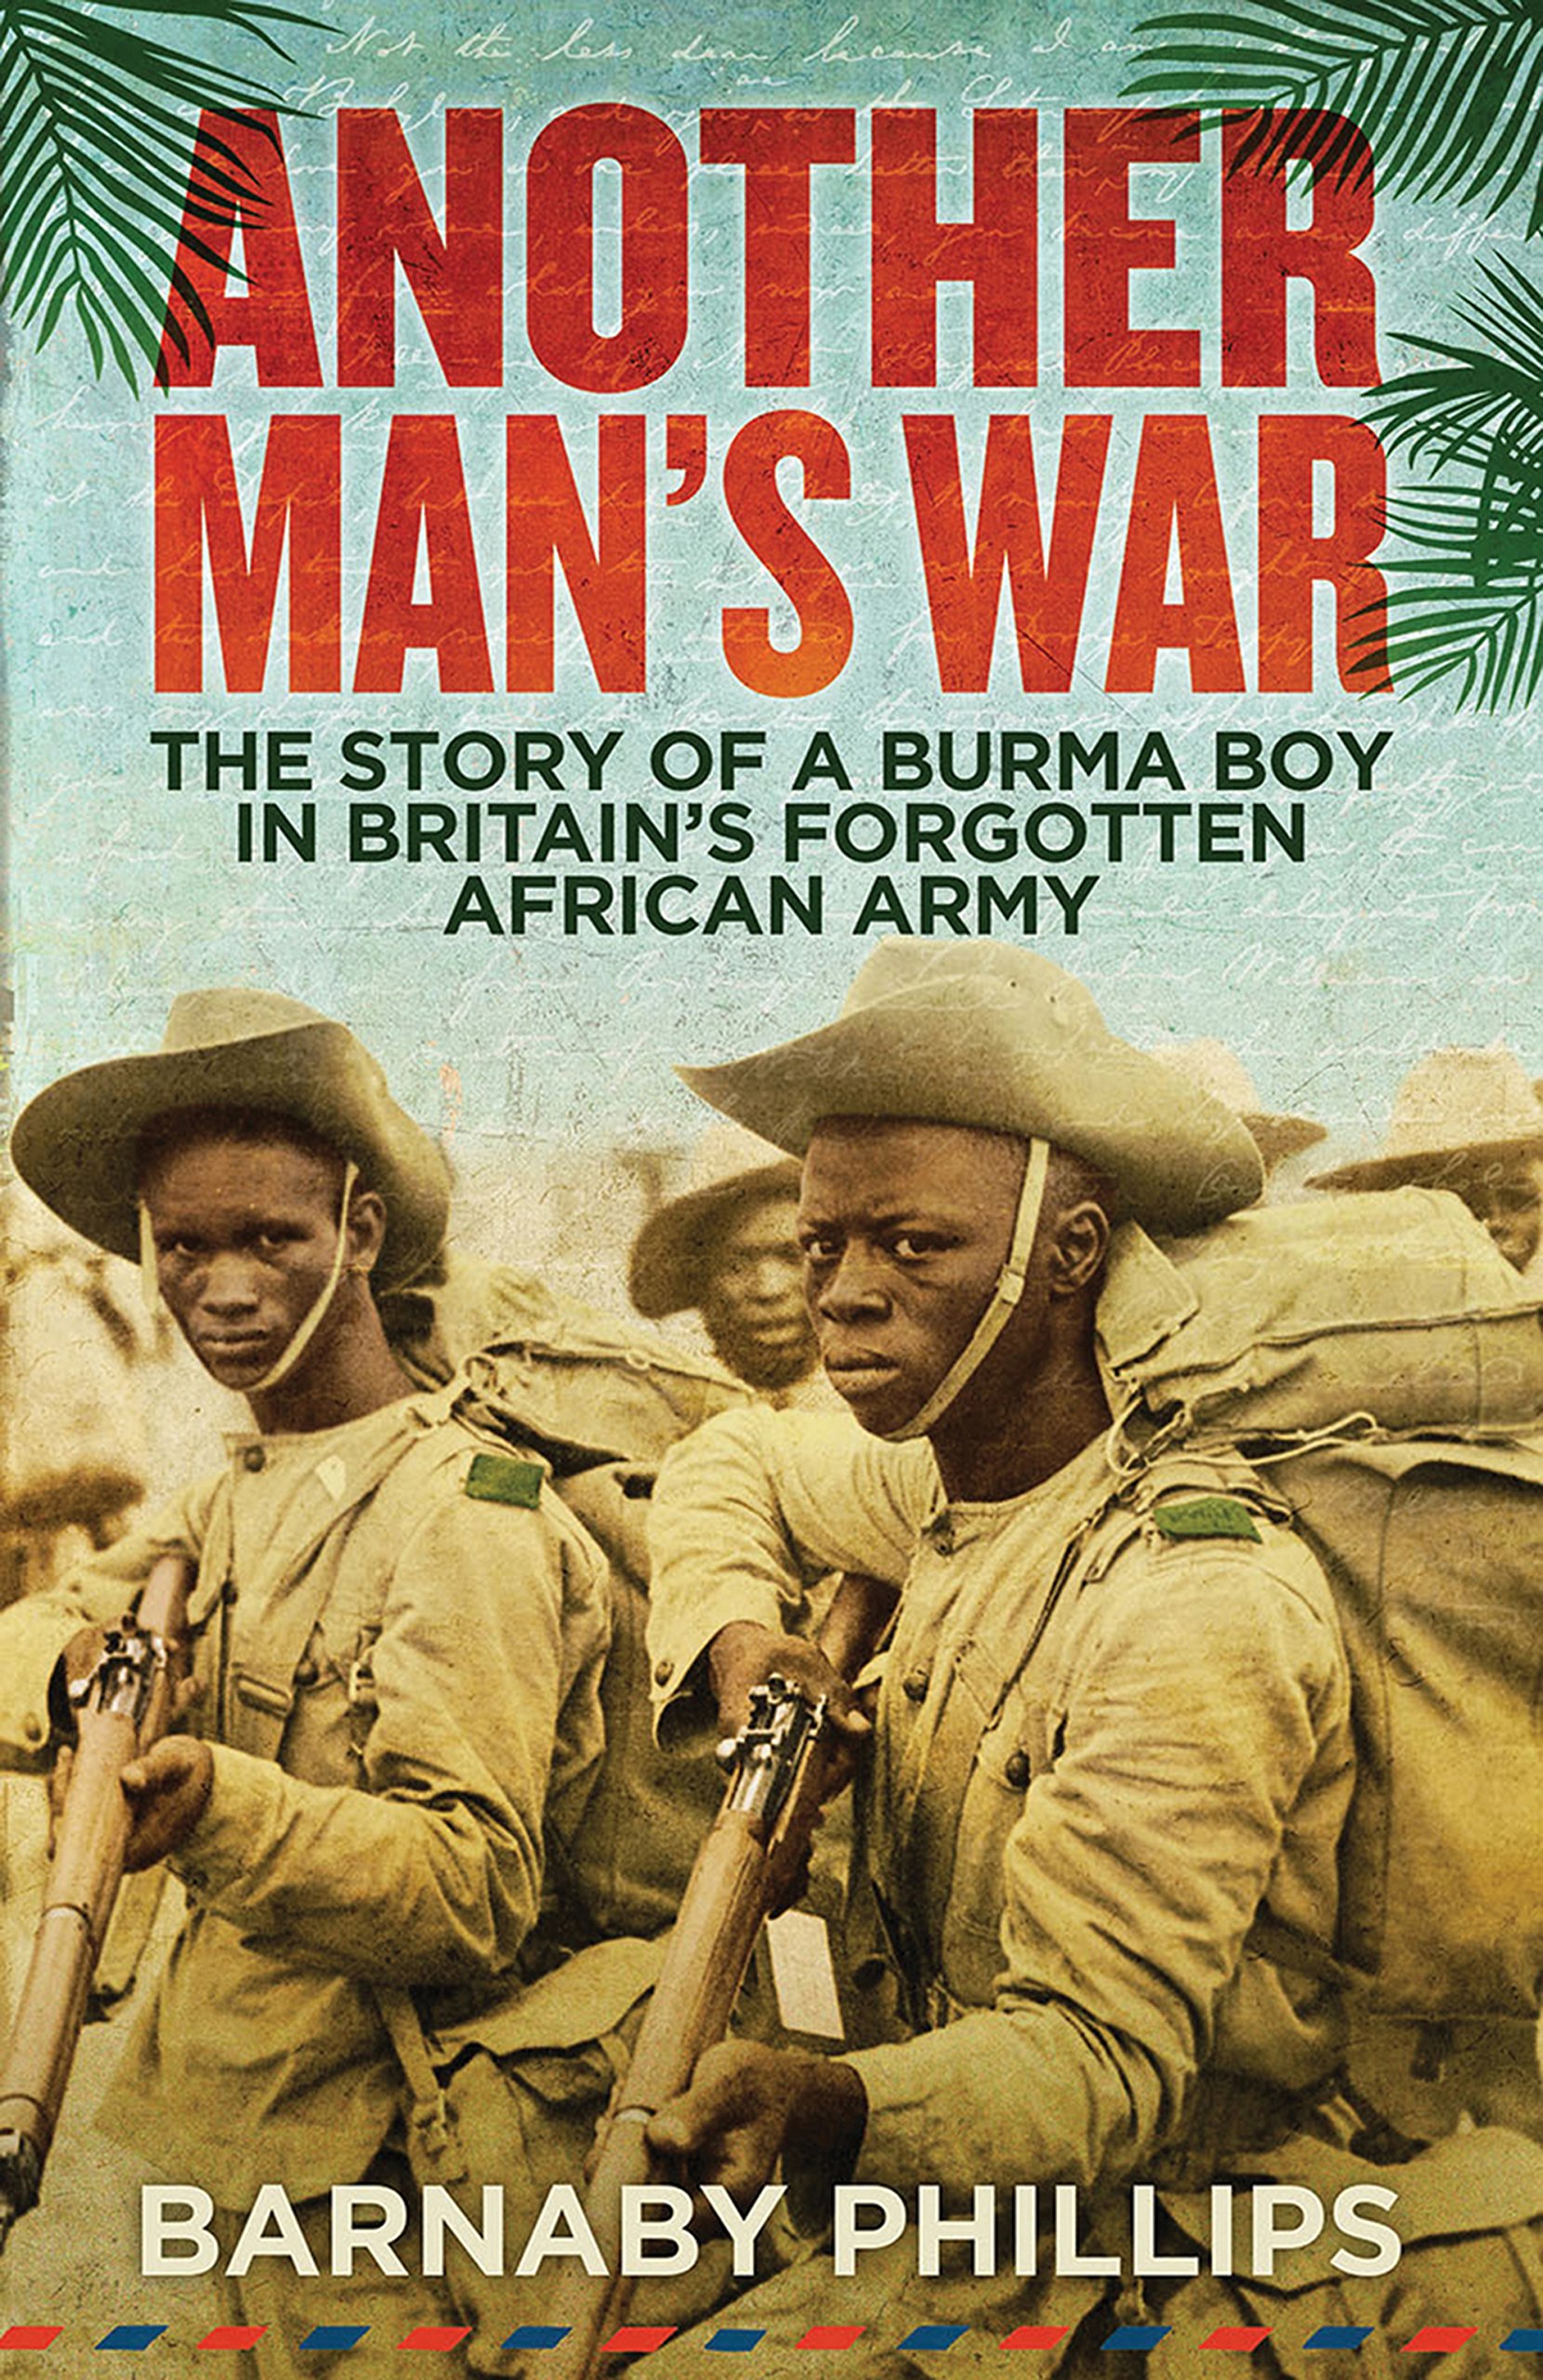 'Another man's war: the story of a Burma Boy in Britain's forgotten African army', by Barnaby Phillips